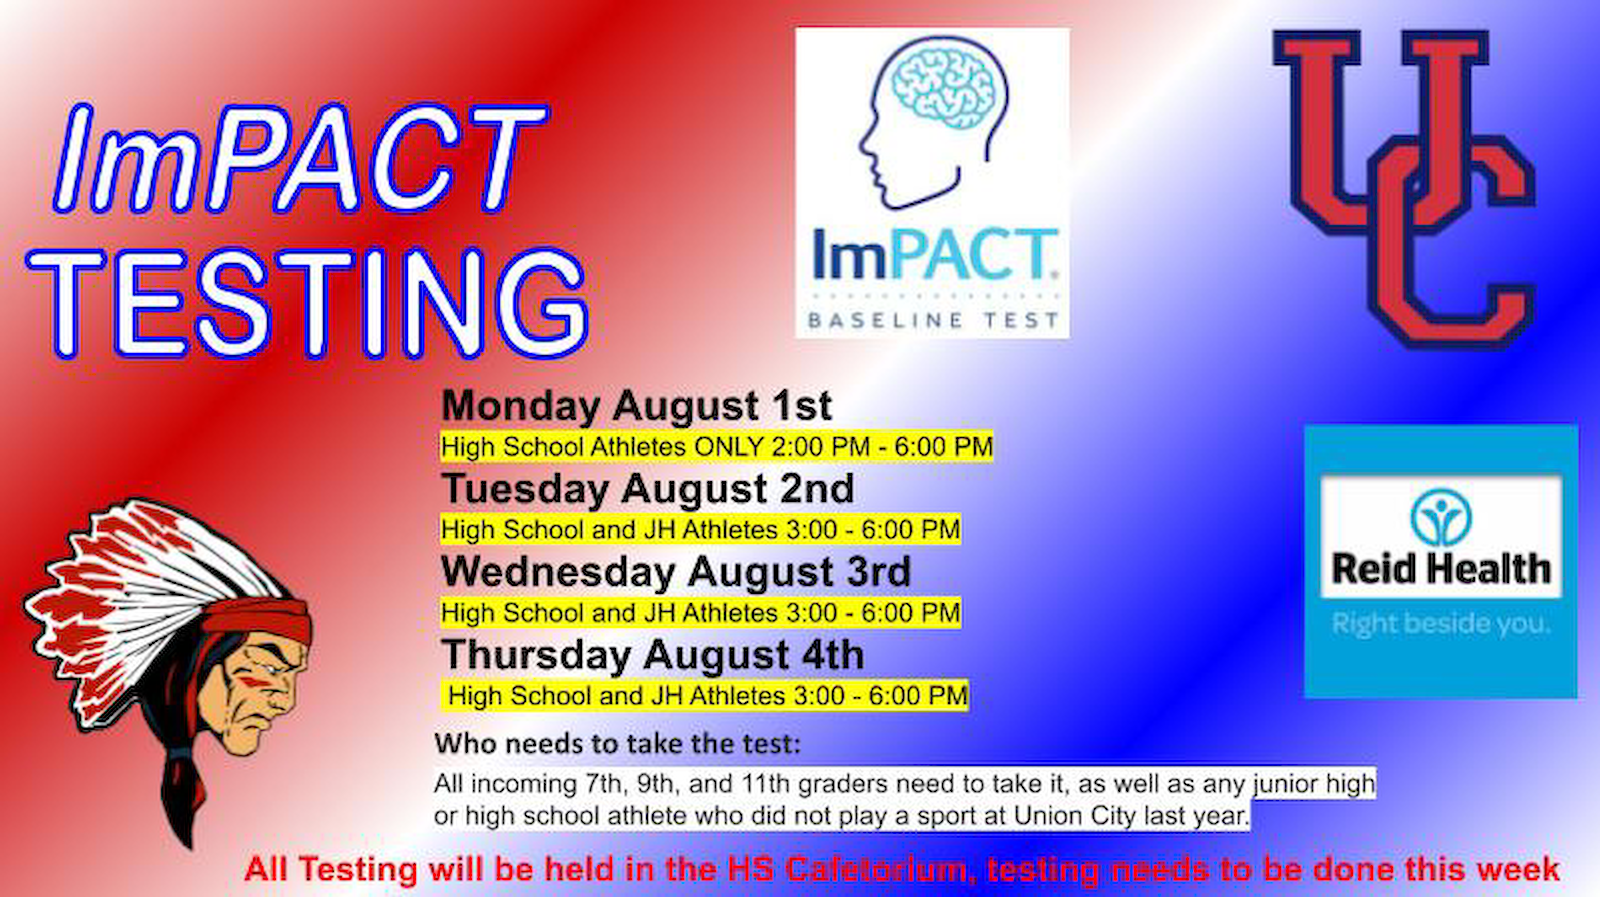 ImPACT TESTING starting Monday August 1st cover photo